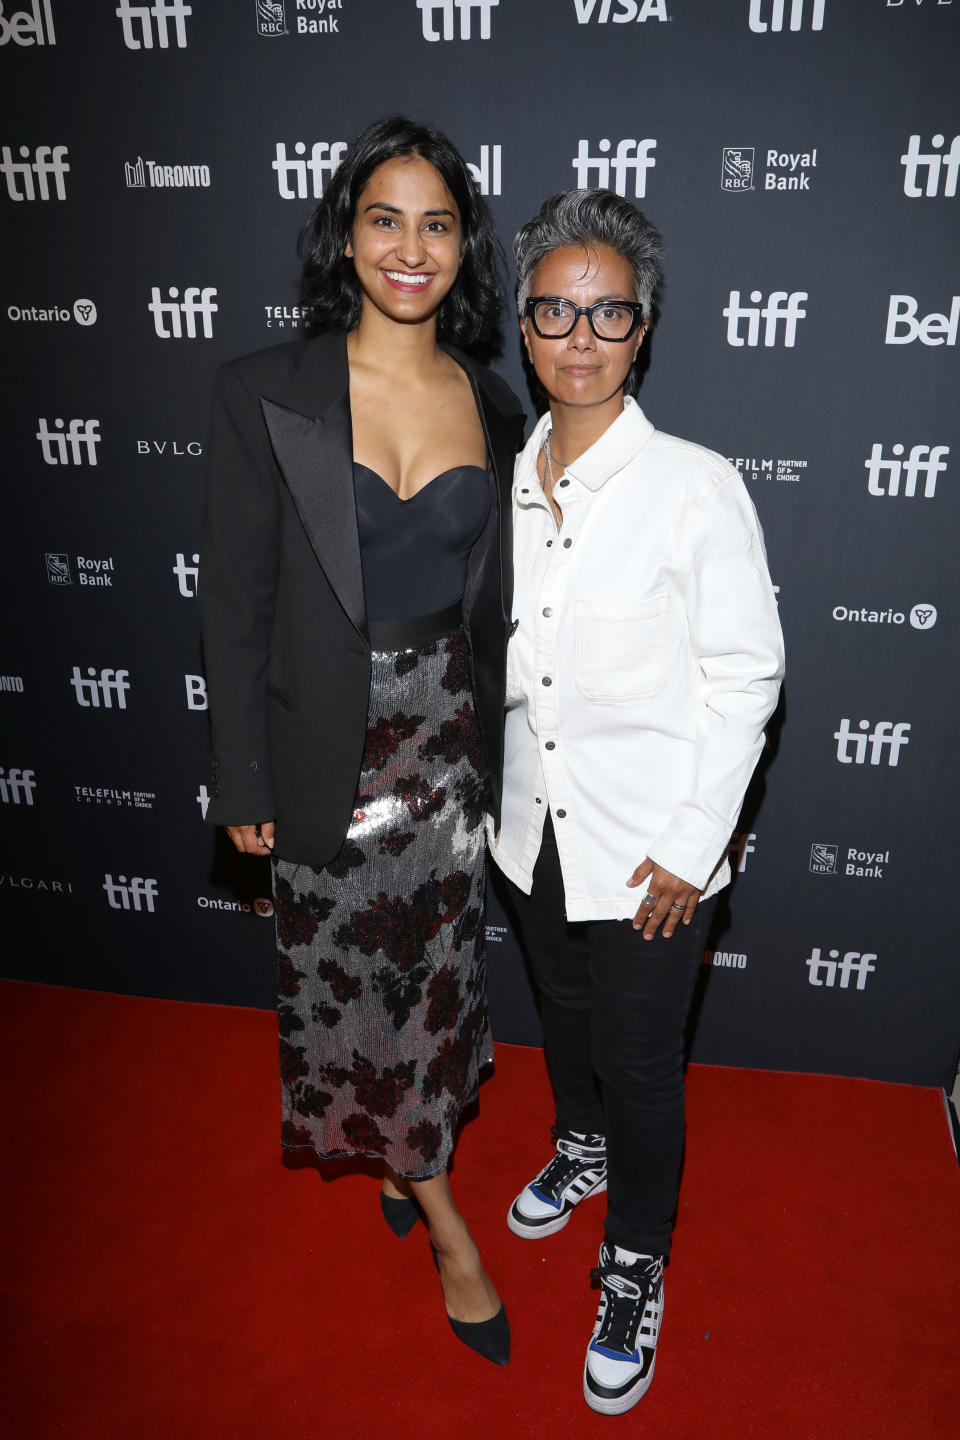 TORONTO, ONTARIO - AUGUST 17: (L-R) Amrit Kaur and Fawzia Mirza attend the 2023 Toronto International Film Festival press event at TIFF Bell Lightbox on August 17, 2023 in Toronto, Ontario. (Photo by Jeremy Chan/Getty Images)